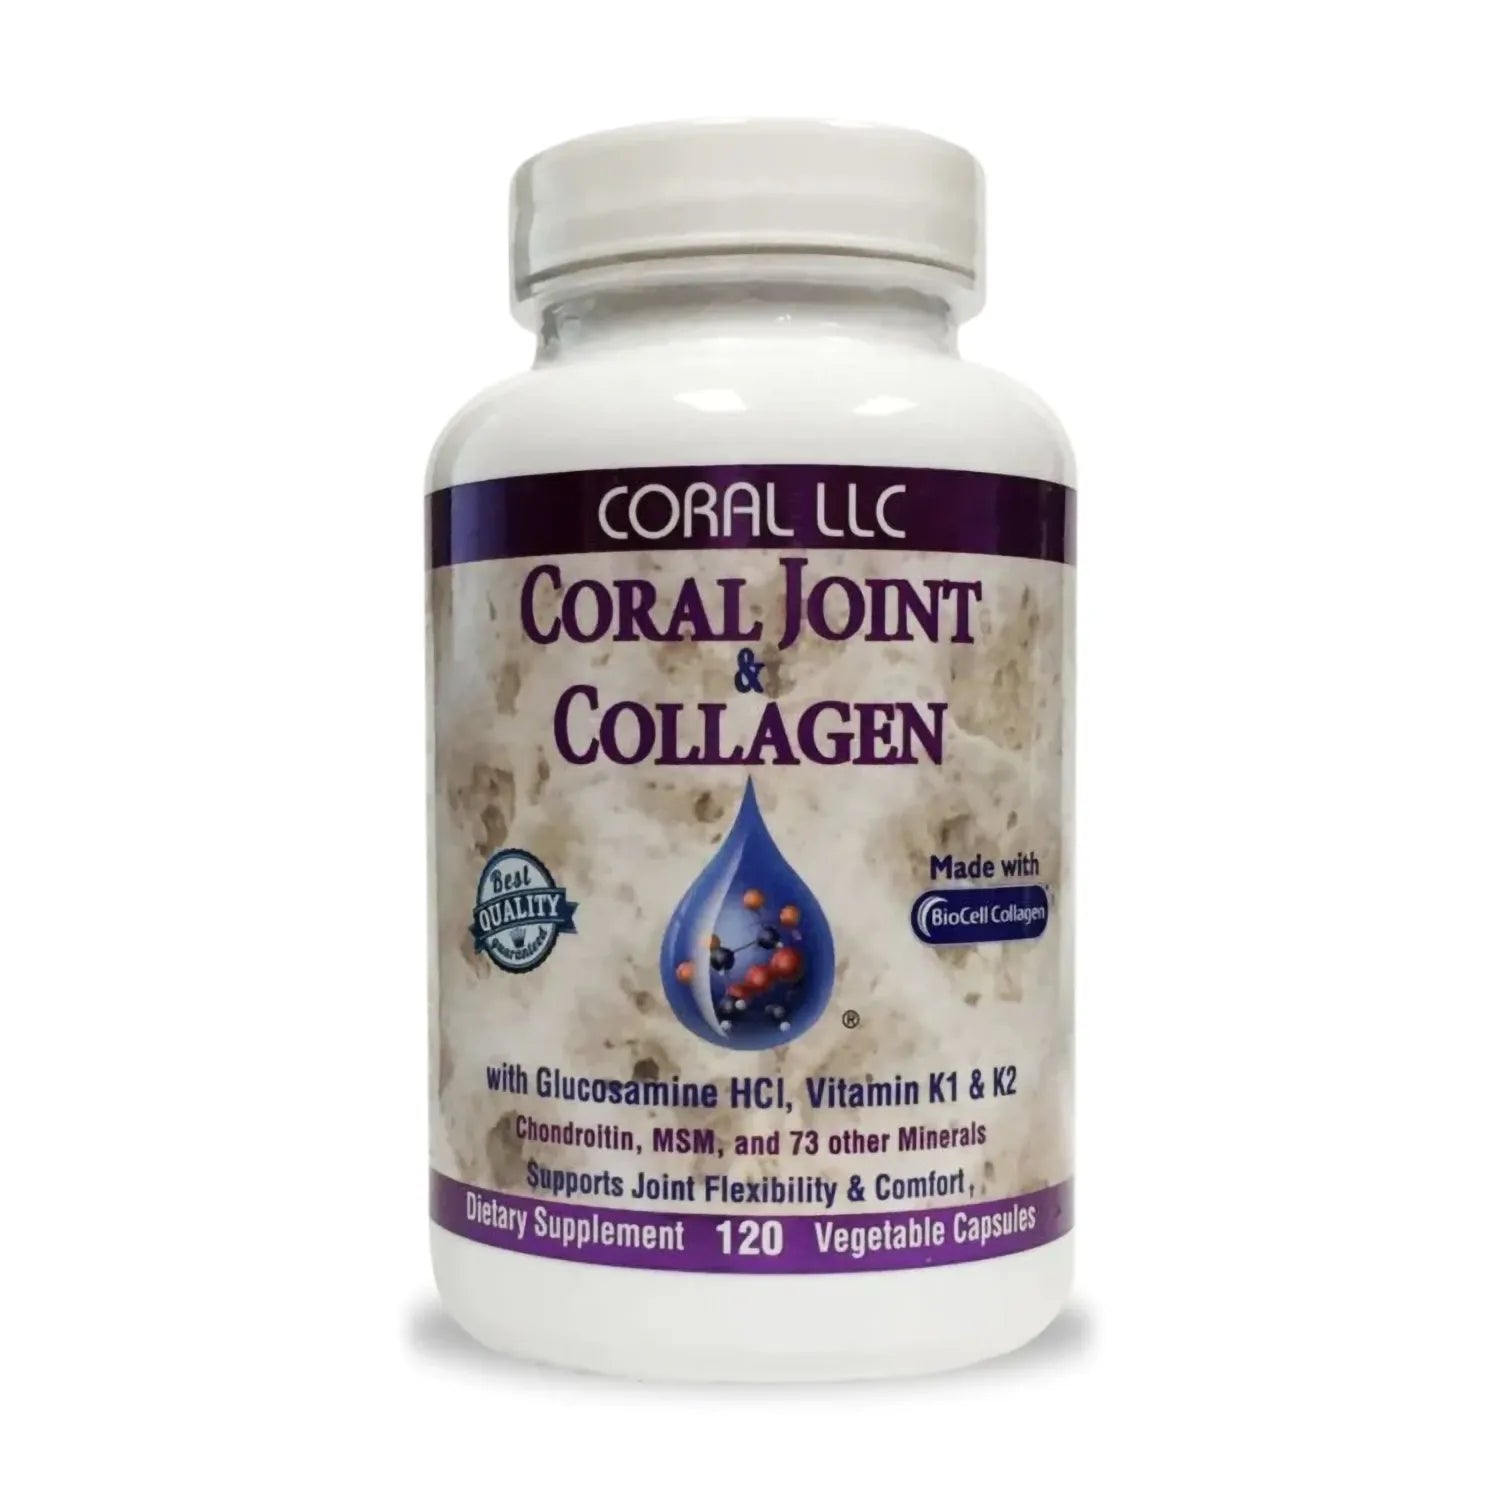 Coral Joint & Collagen (120ct)